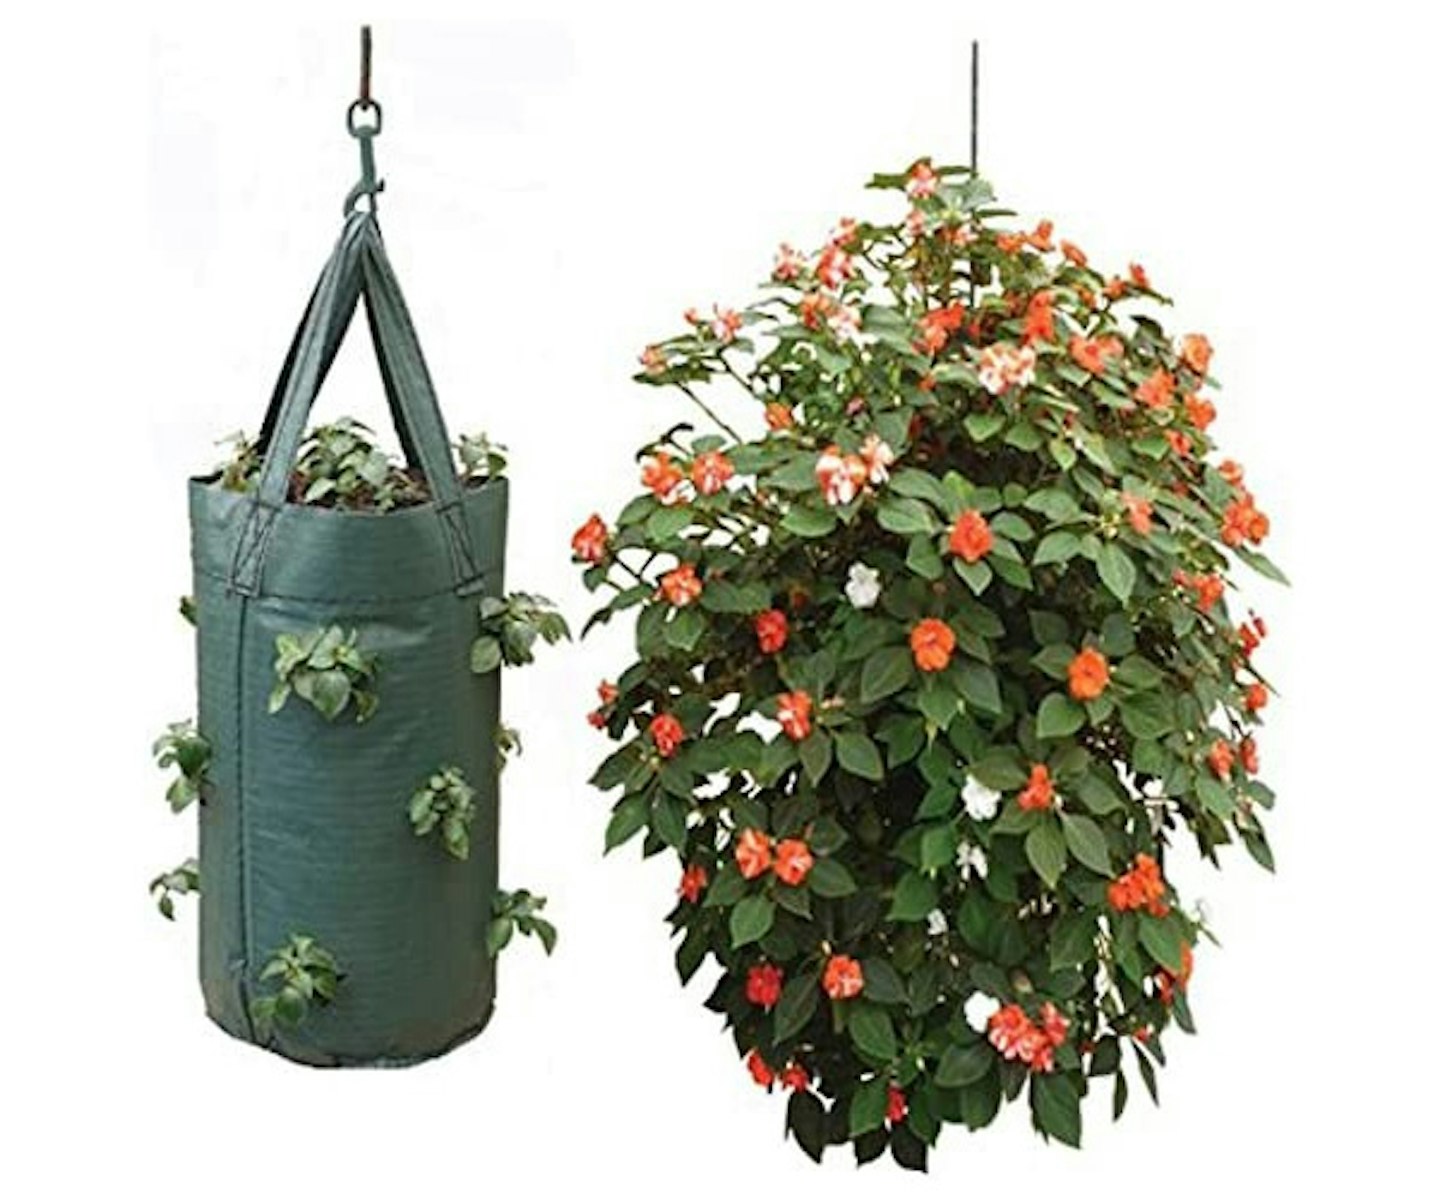 Nutley's Hanging Tomato Planter Growbags